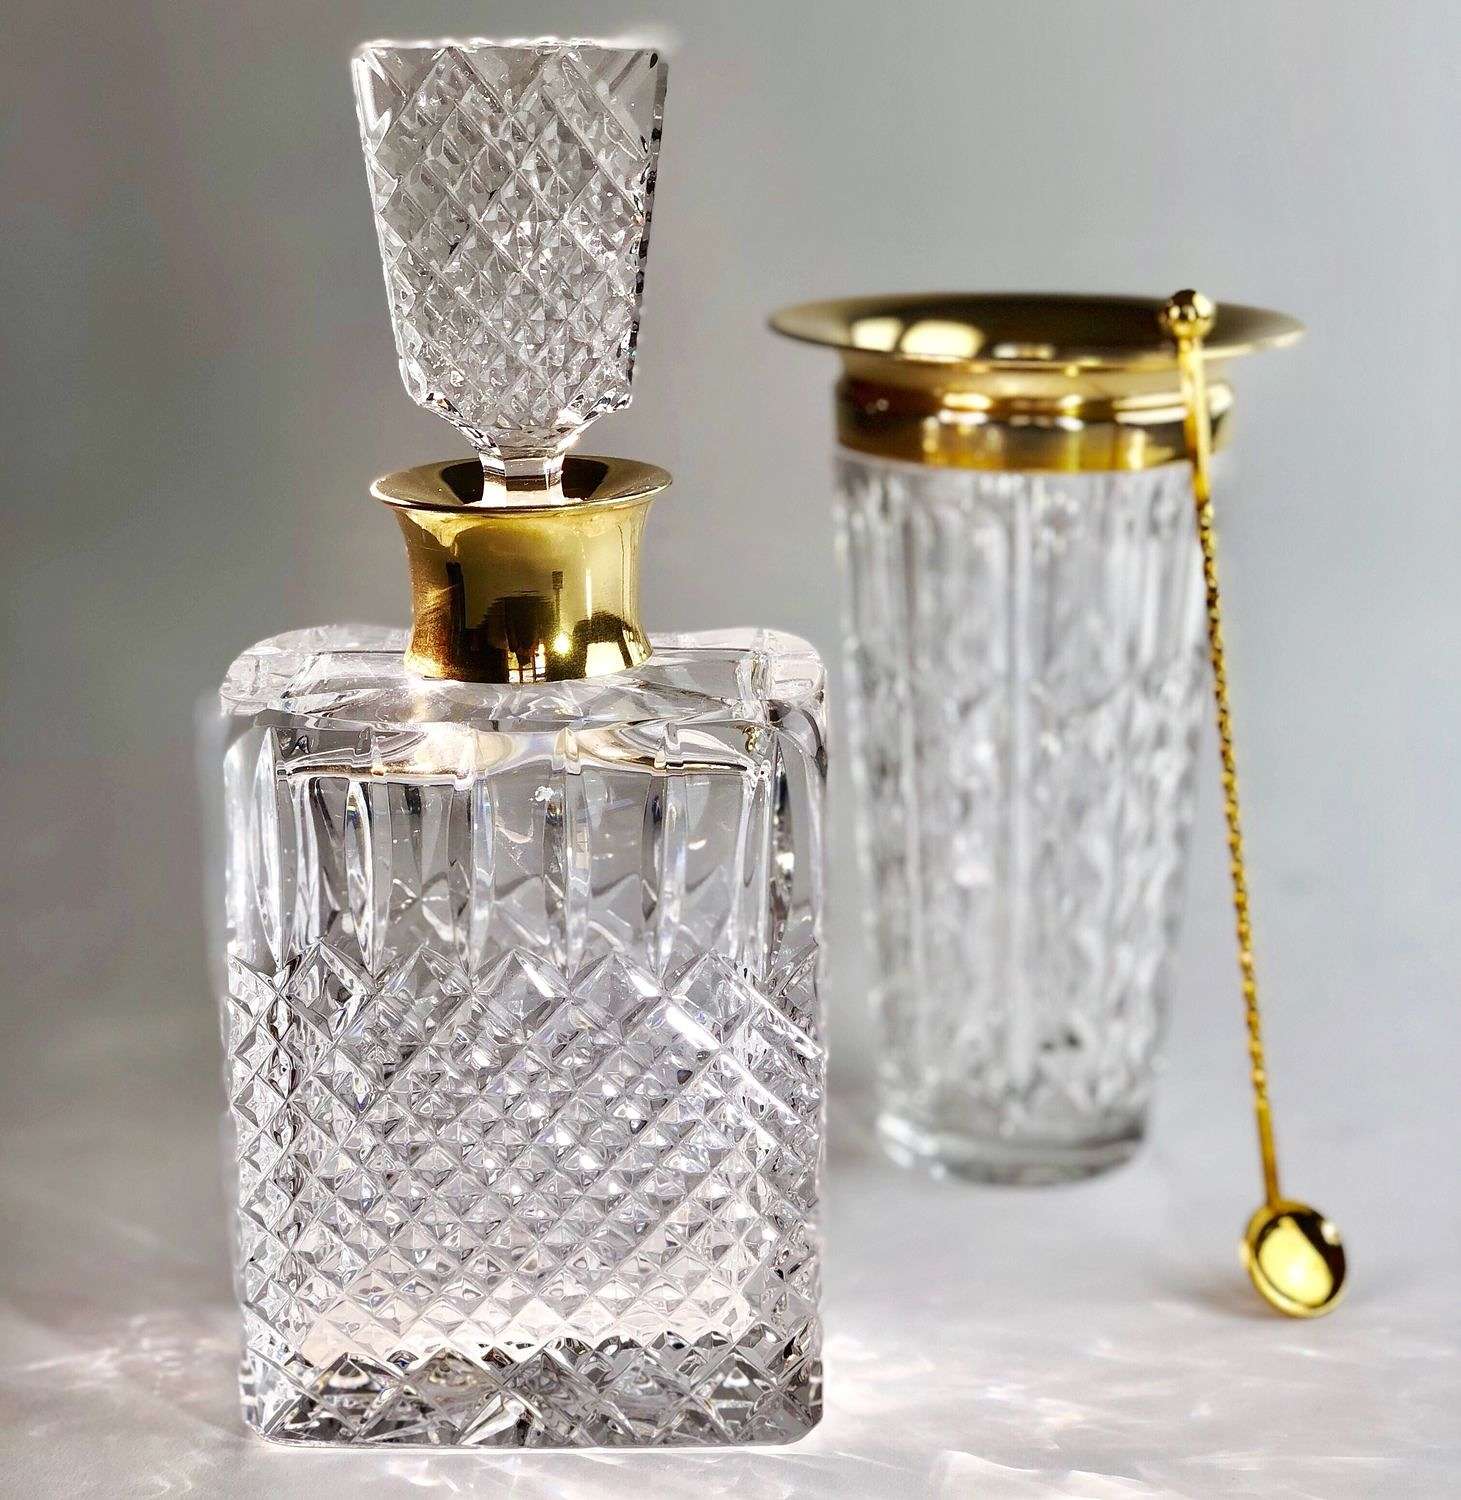 Mid 20th Century crystal decanter attributed to St Louis